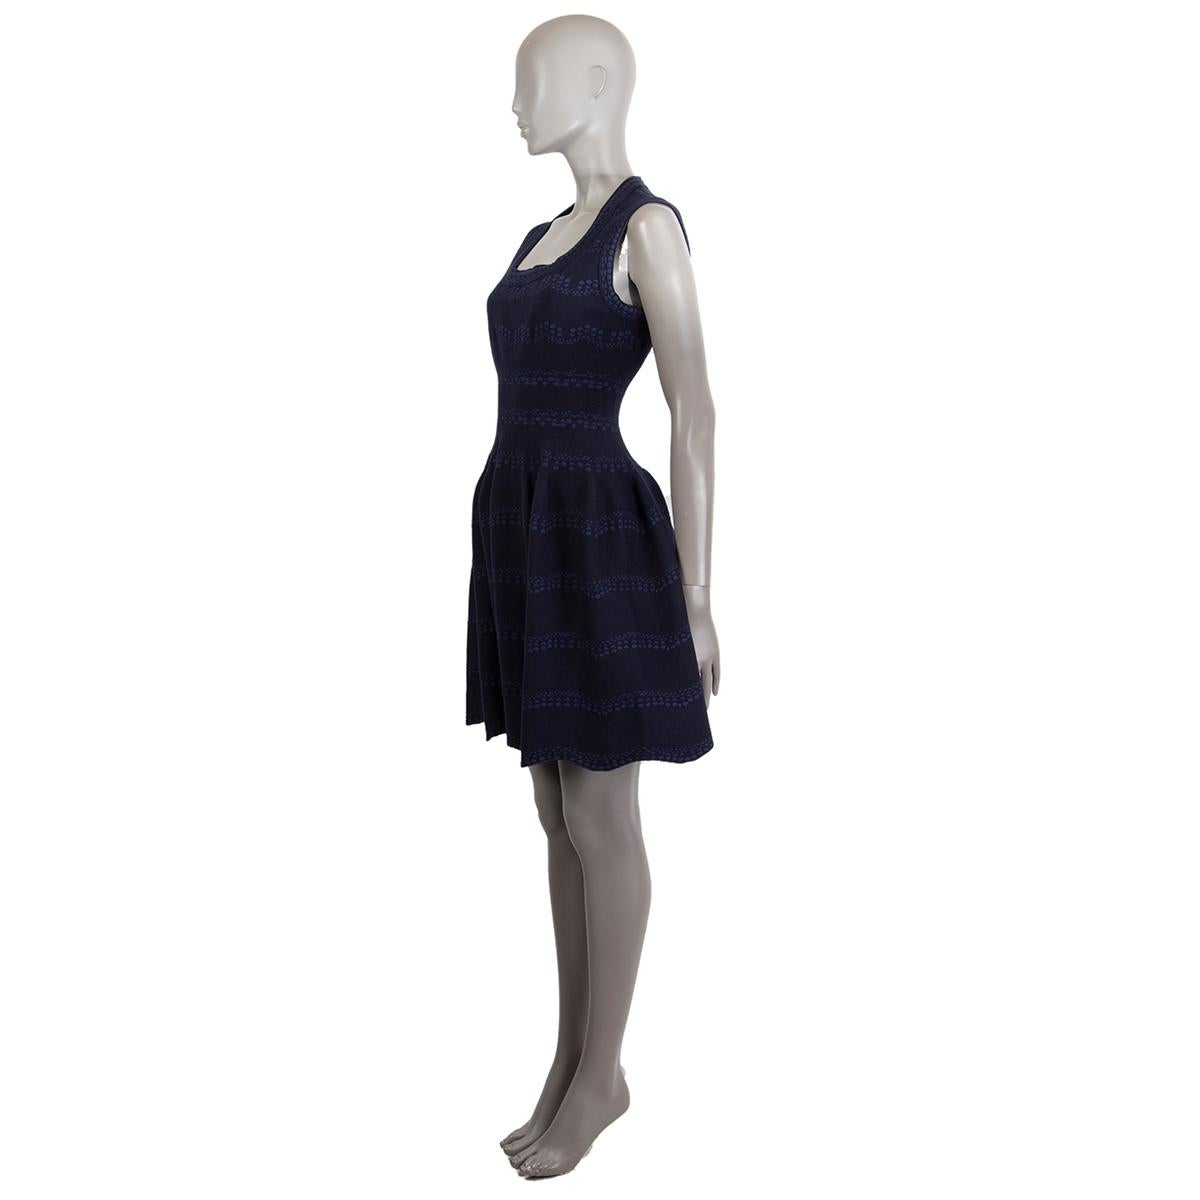 Alaïa flared jacquard knit sleeve-less scoop-neck dress in midnight blue and navy wool (43%), viscose (37%), polyamide (7%) and elastane (3%). Opens with zipper on the back. Unlined. Has been worn and is in excellent condition.

Tag Size 40
Size